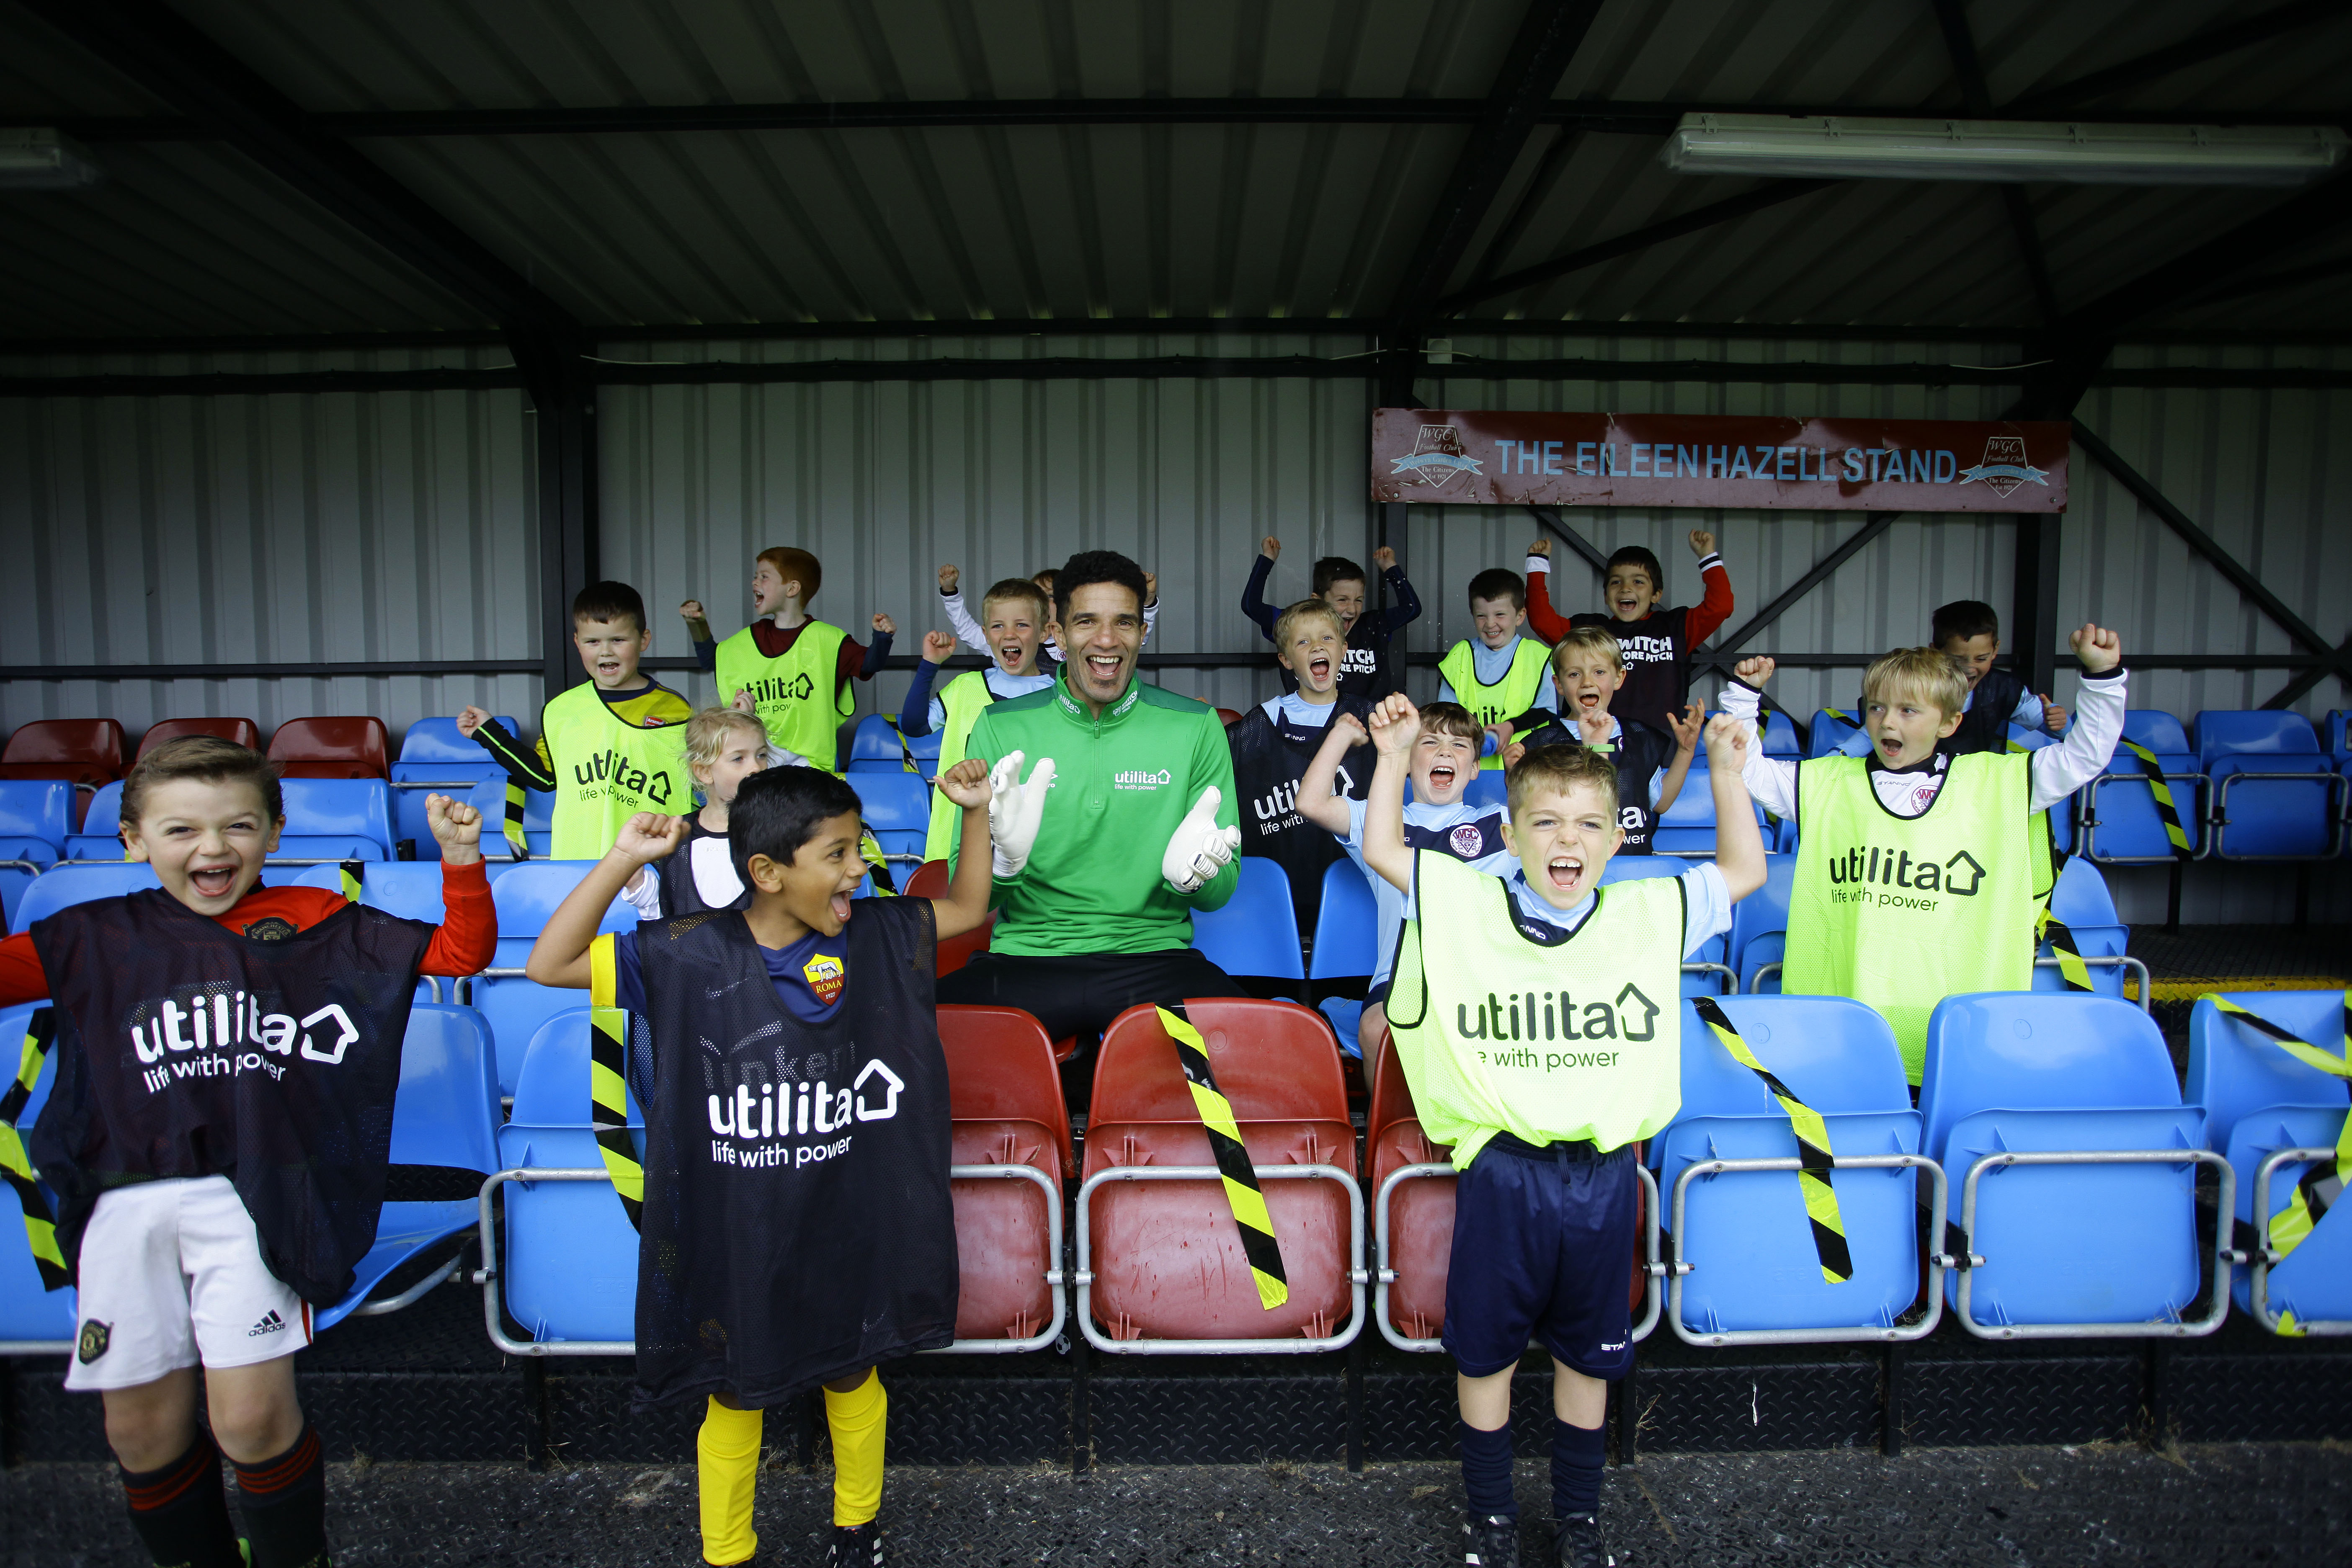 David James is working as an ambassador with Utilita to promote their Switch Before Pitch campaign.